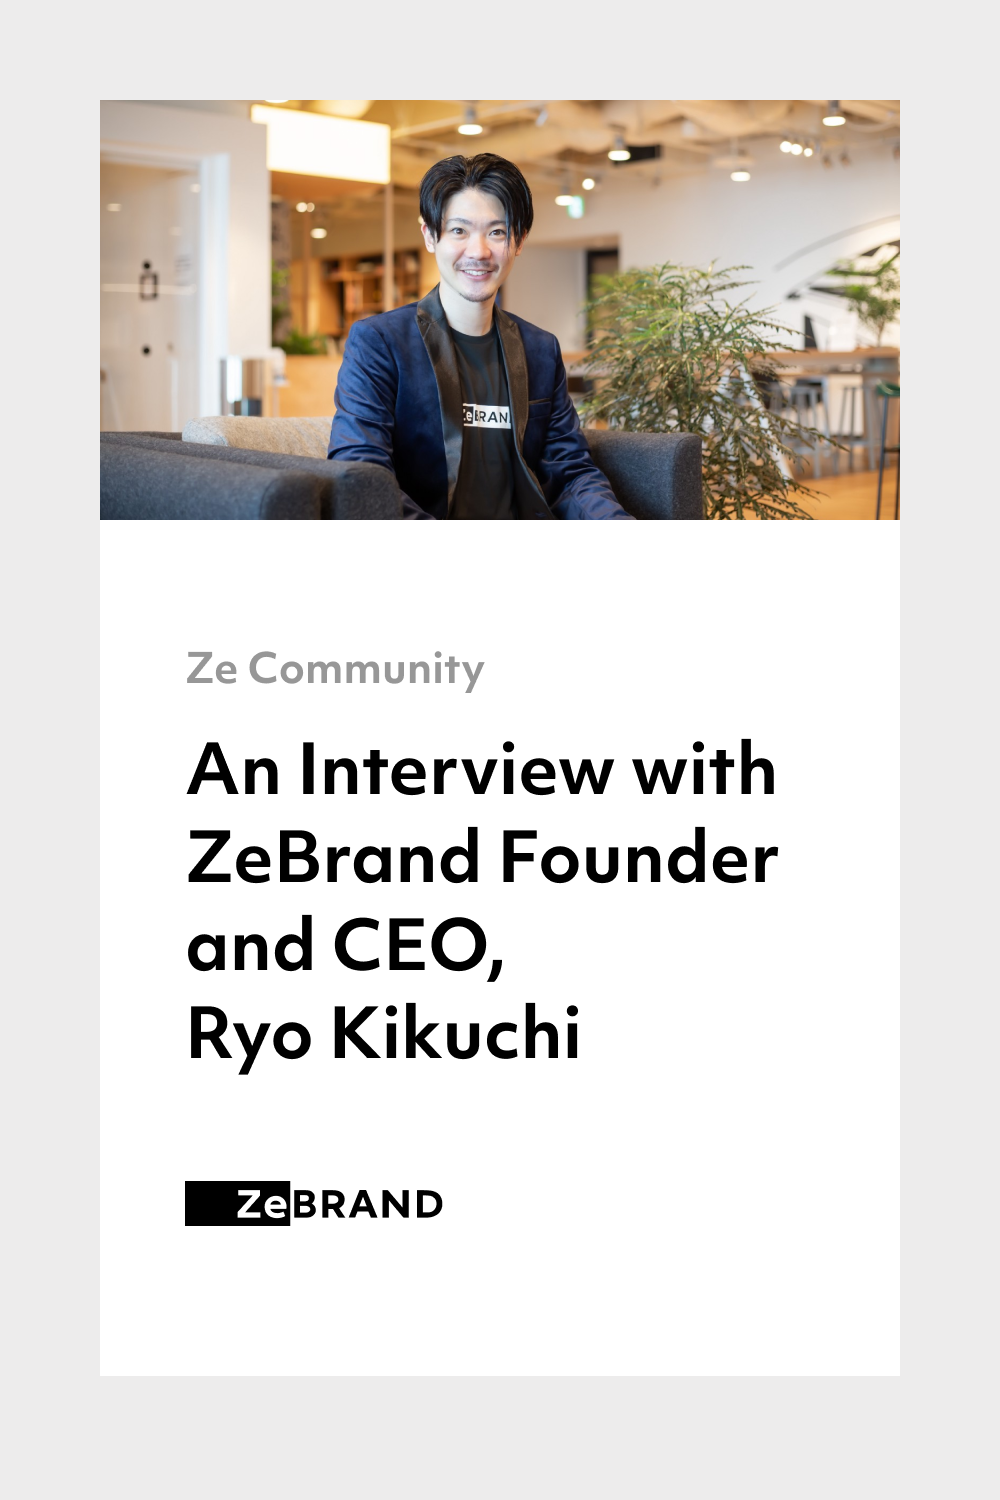 The Founder and CEO of ZeBrand, Ryo Kikuchi, is sitting in the middle of the room.